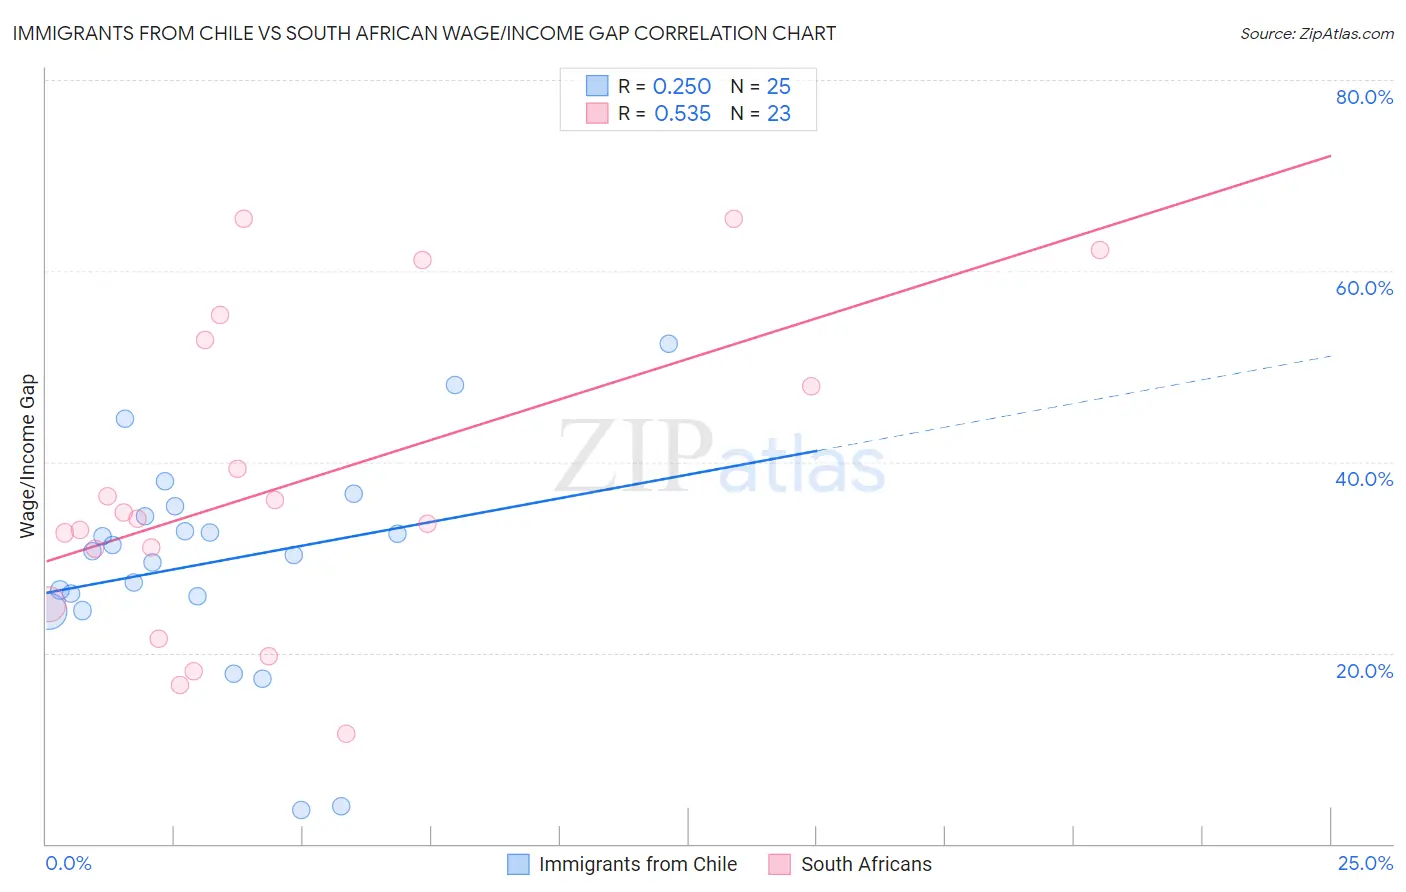 Immigrants from Chile vs South African Wage/Income Gap